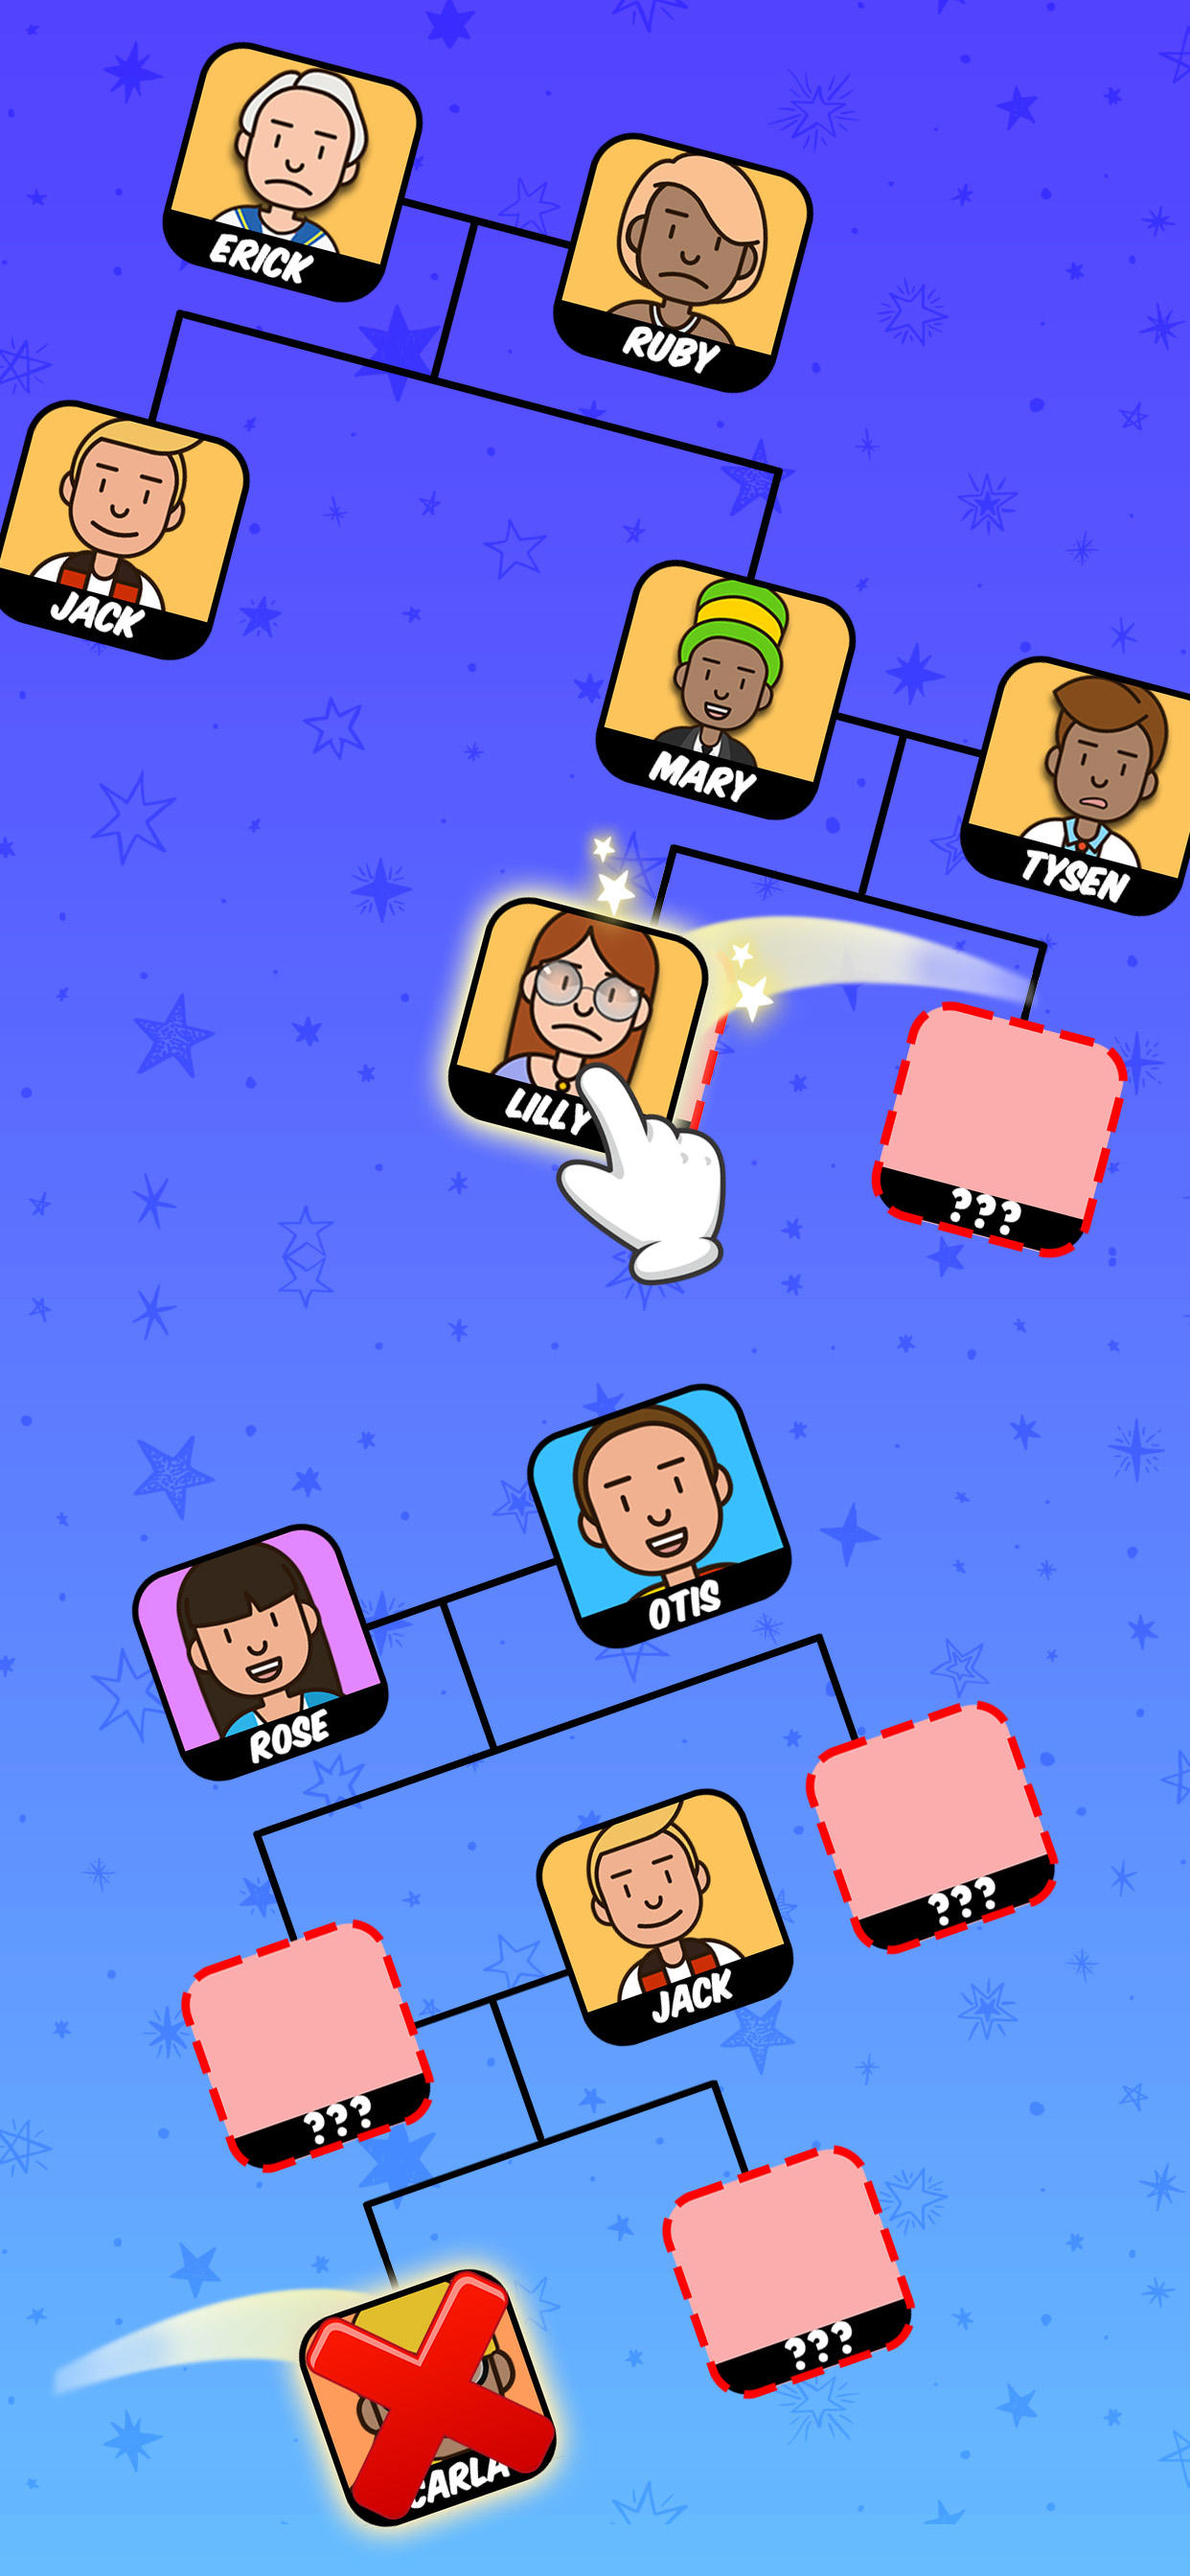 Screenshot 1 of Family Tree Logic Puzzle Games 1.3